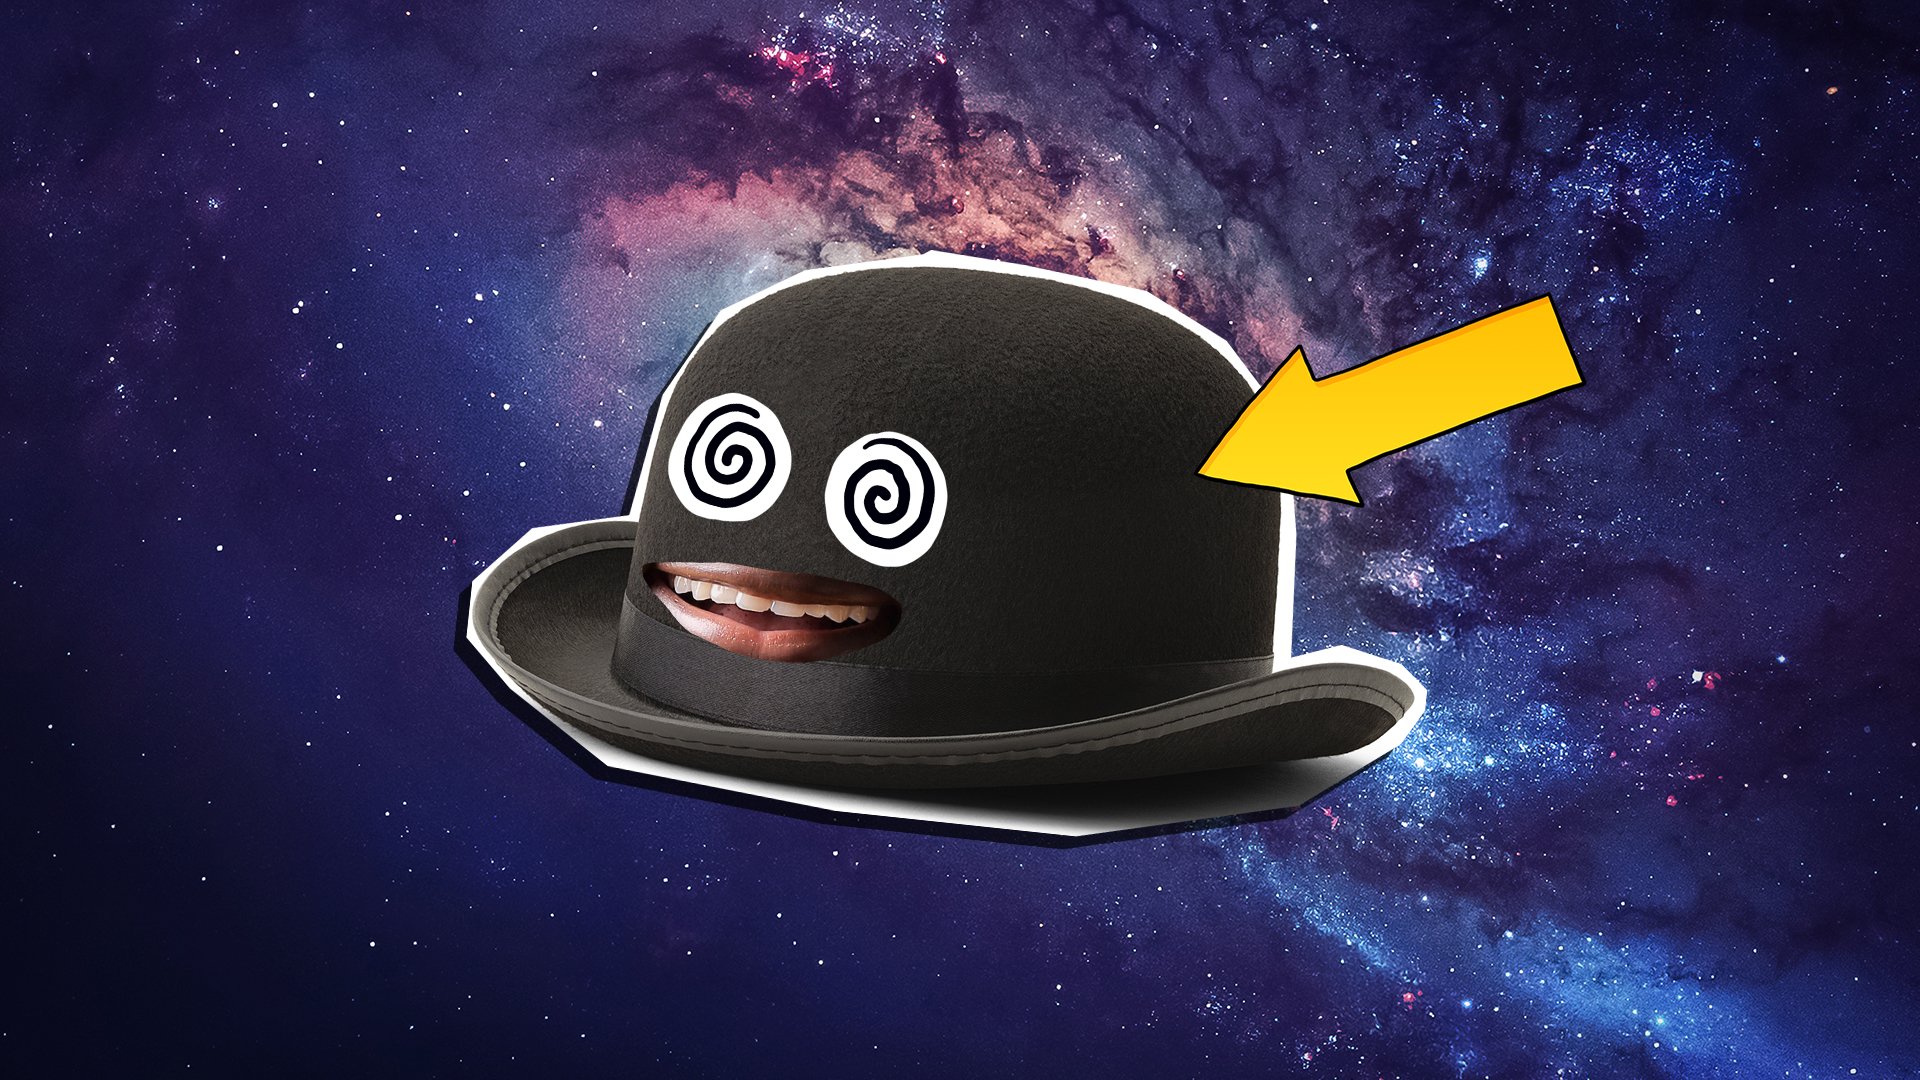 A bowler hat in space